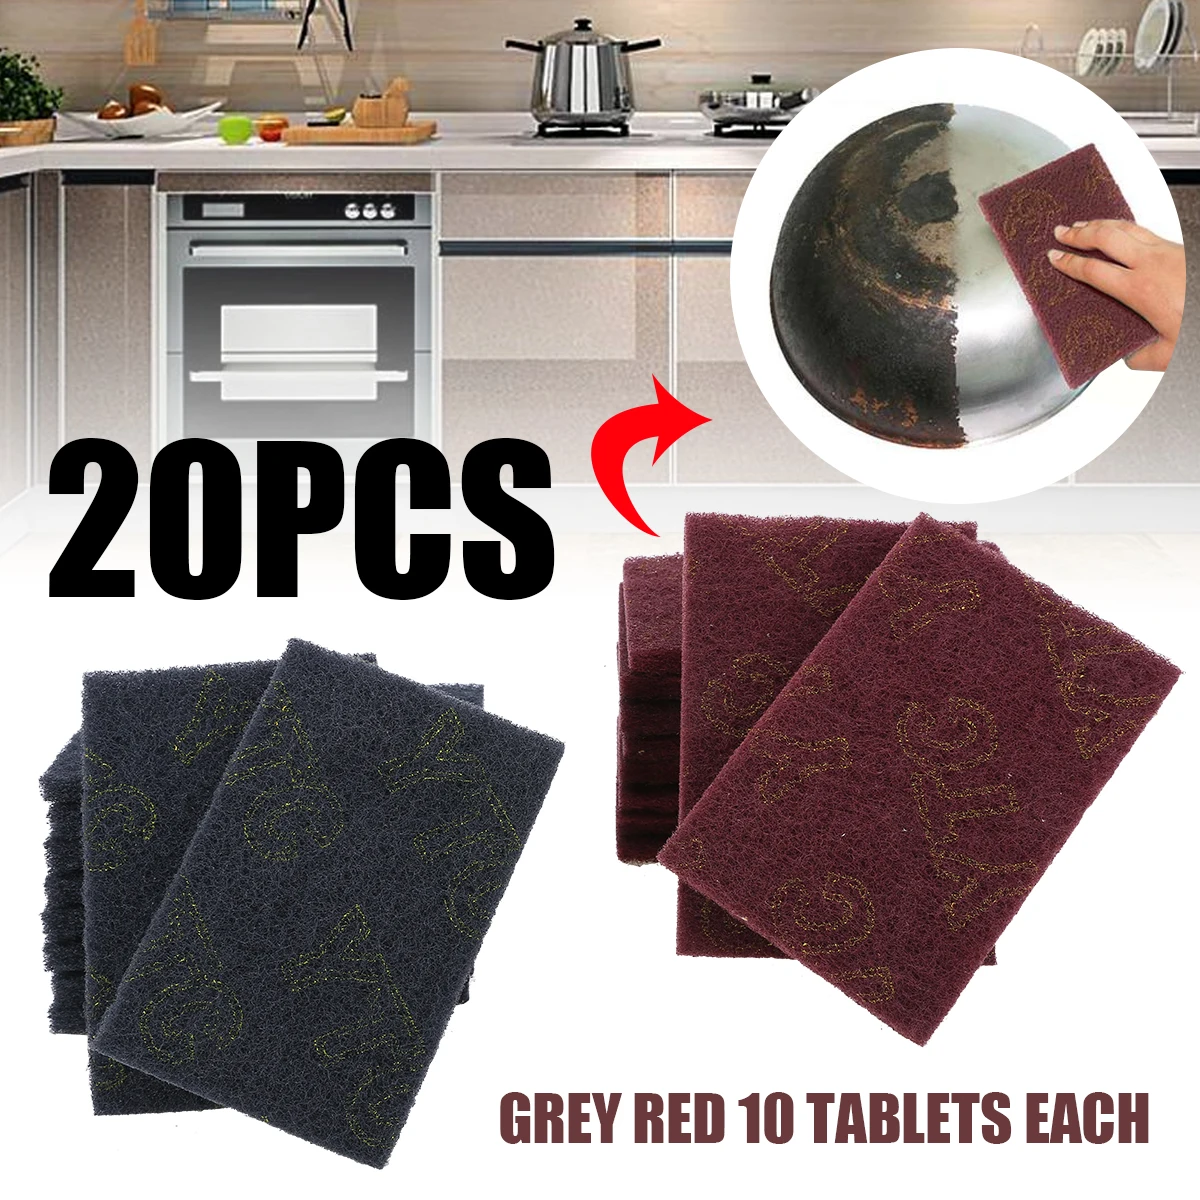 

20Pcs 15 x 10 x 0.7cm Grey/Red Abrasive Finishing Fine Pads Hand Sanding Grinding Pad For Kitchen Cleaning Tools